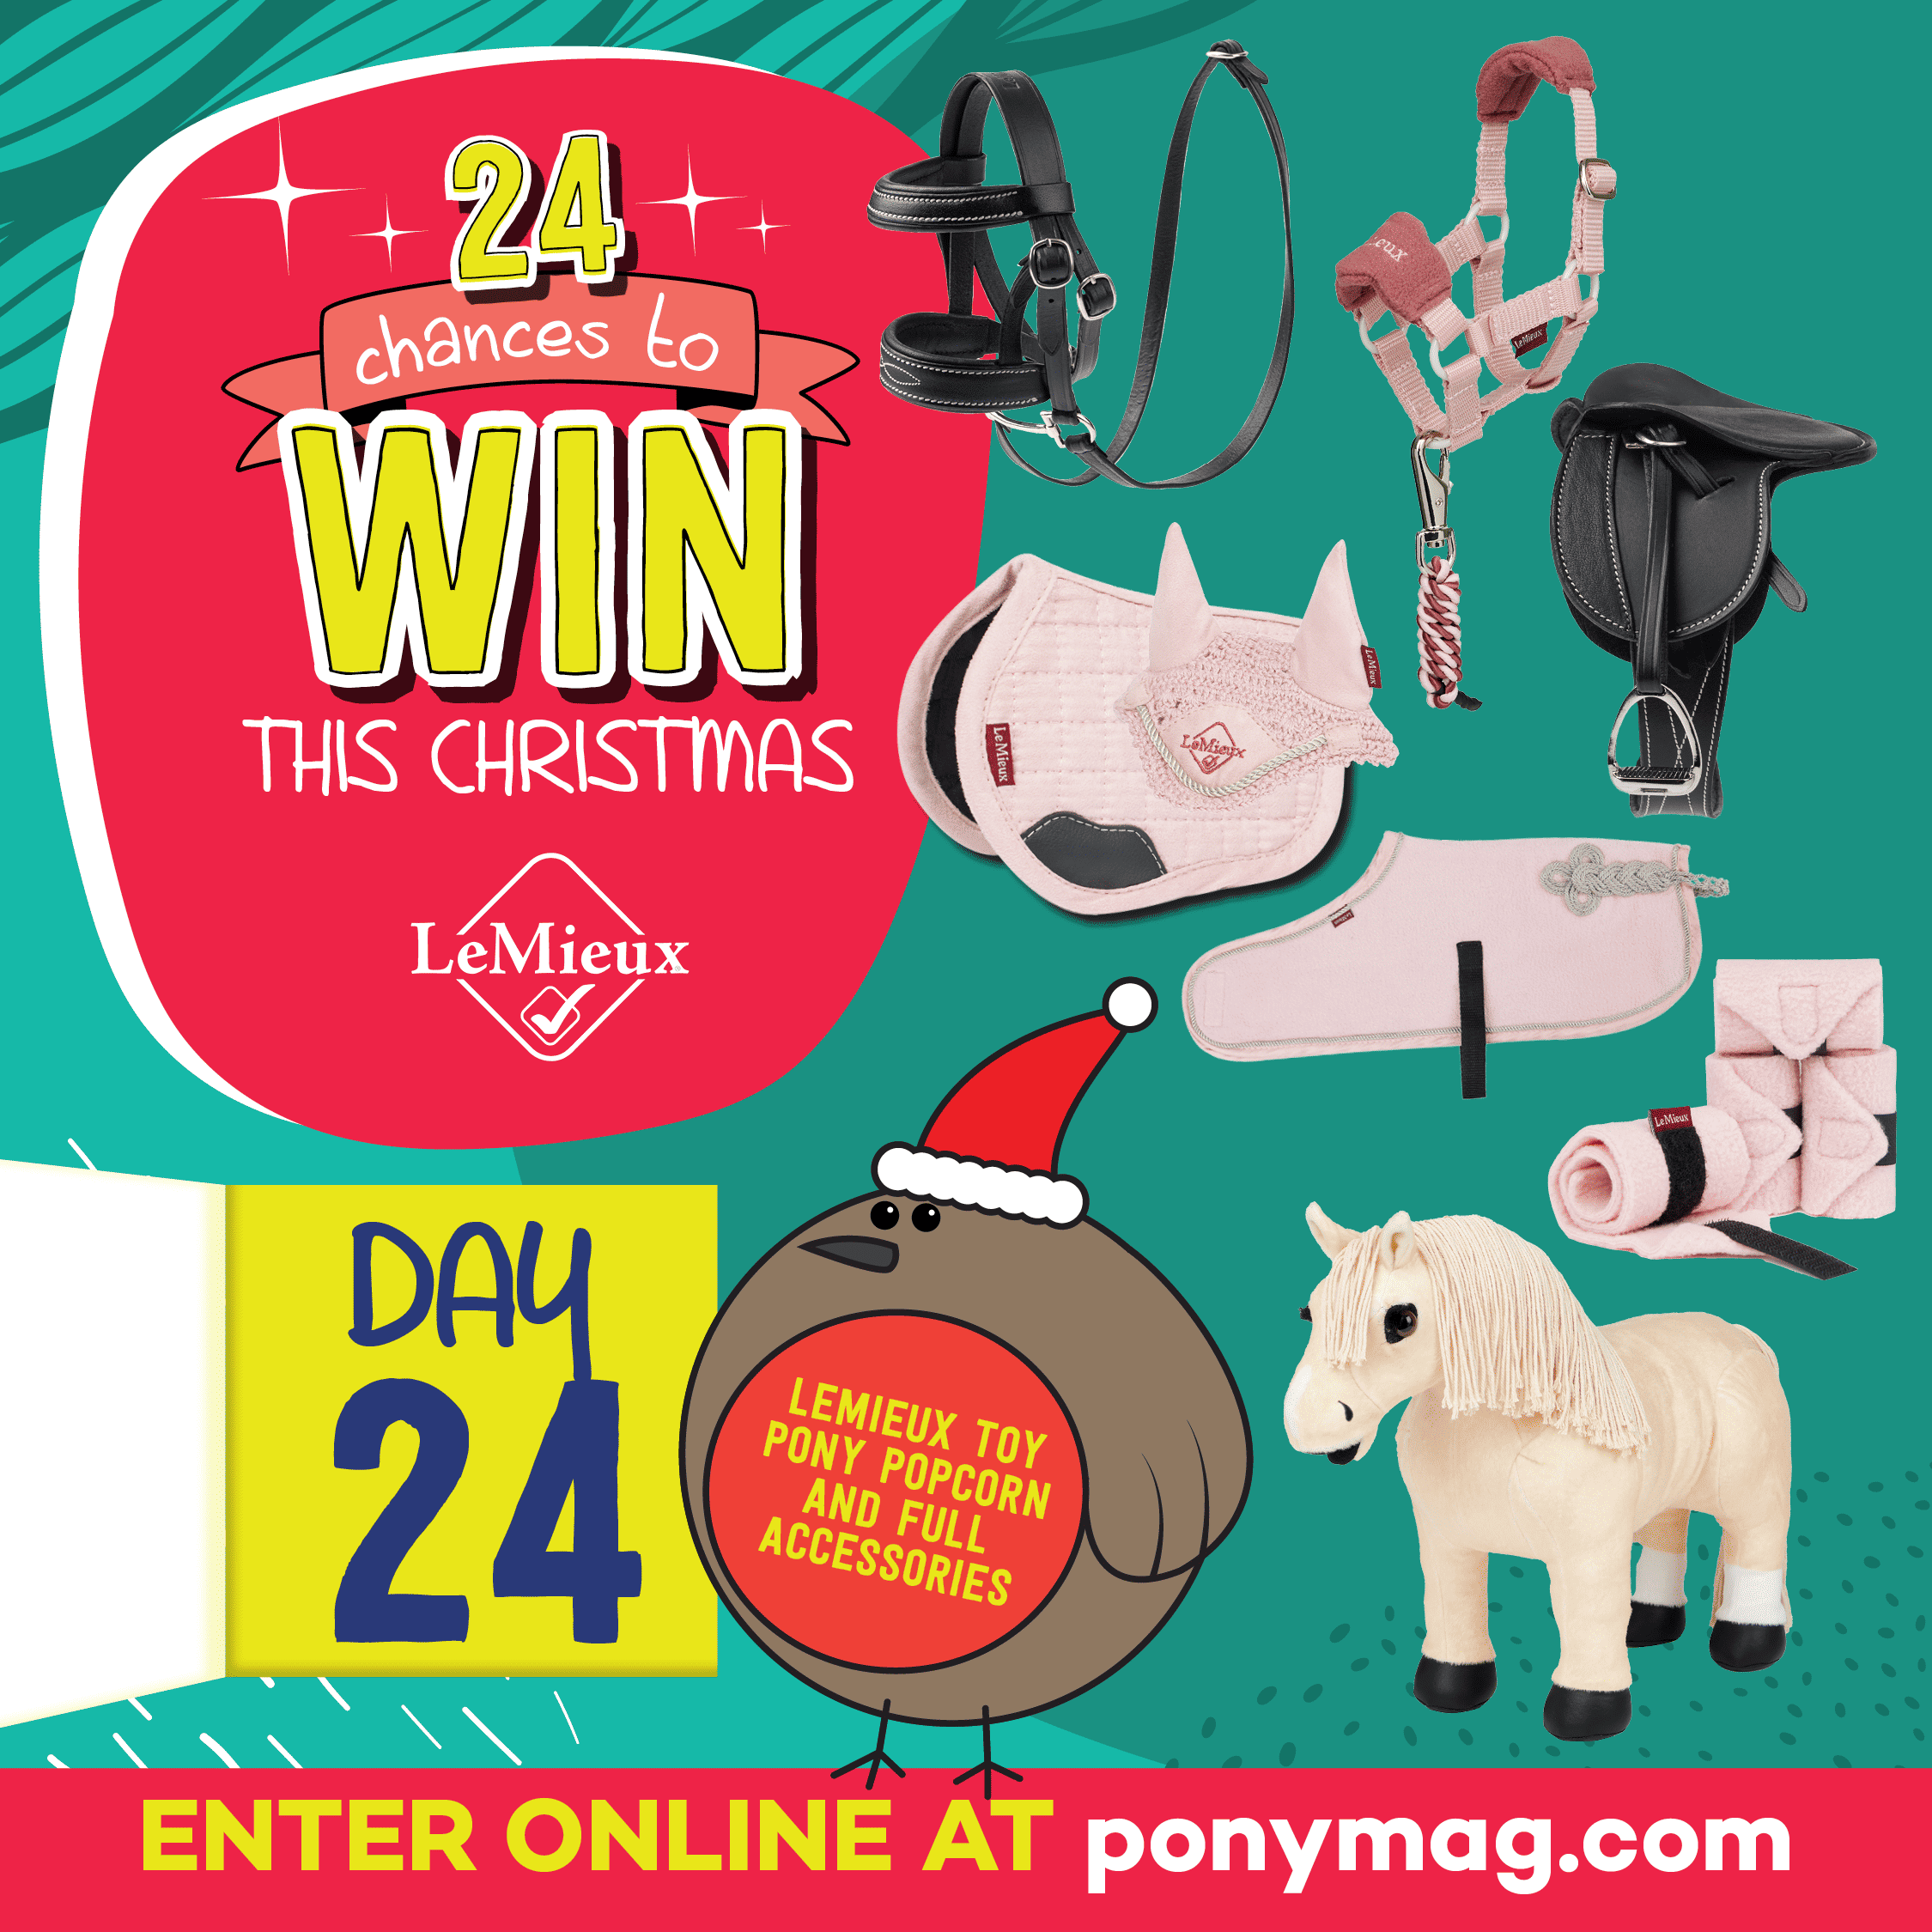 Advent Calendar - Day 24, LeMieux Toy Pony Popcorn and full accessories